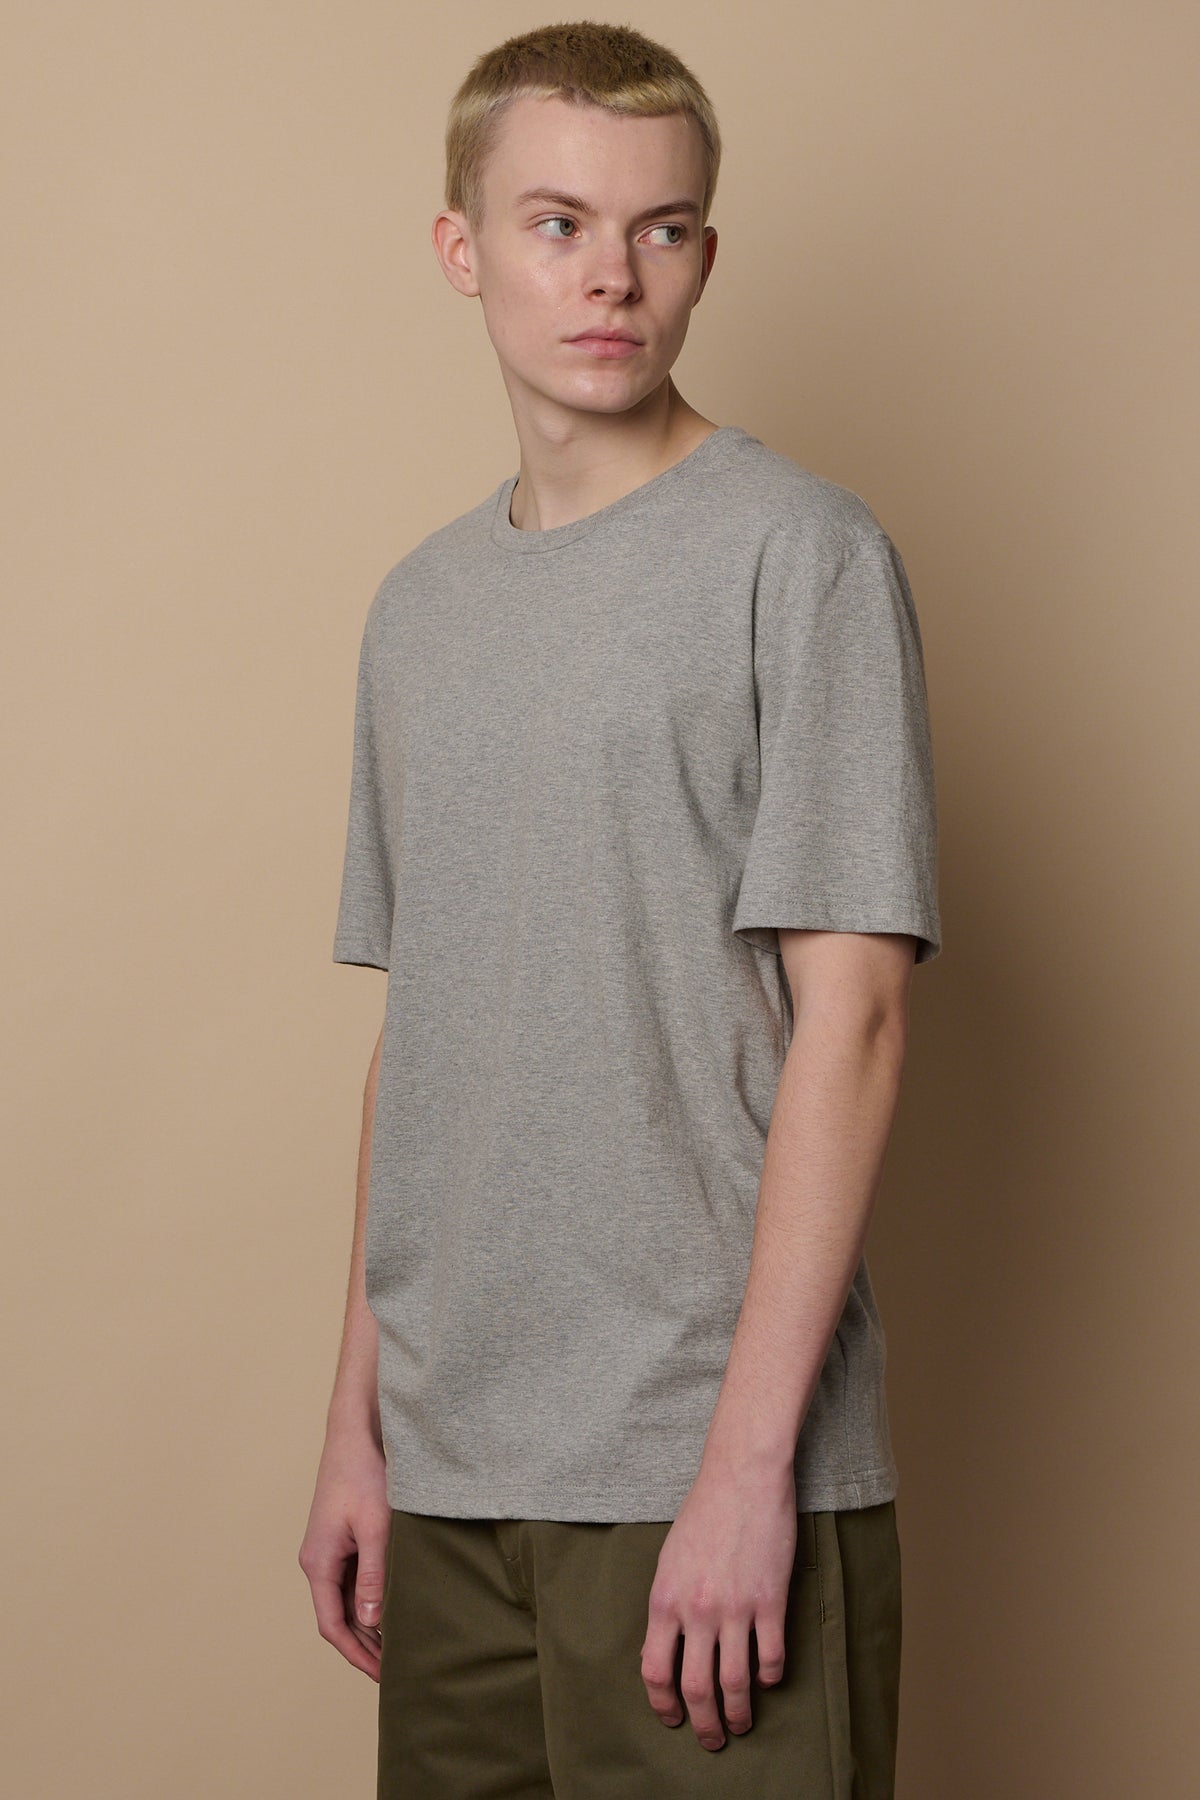 
            Thigh up image of male looking to the side, with arms by his side wearing short sleeve crew neck t shirt in grey